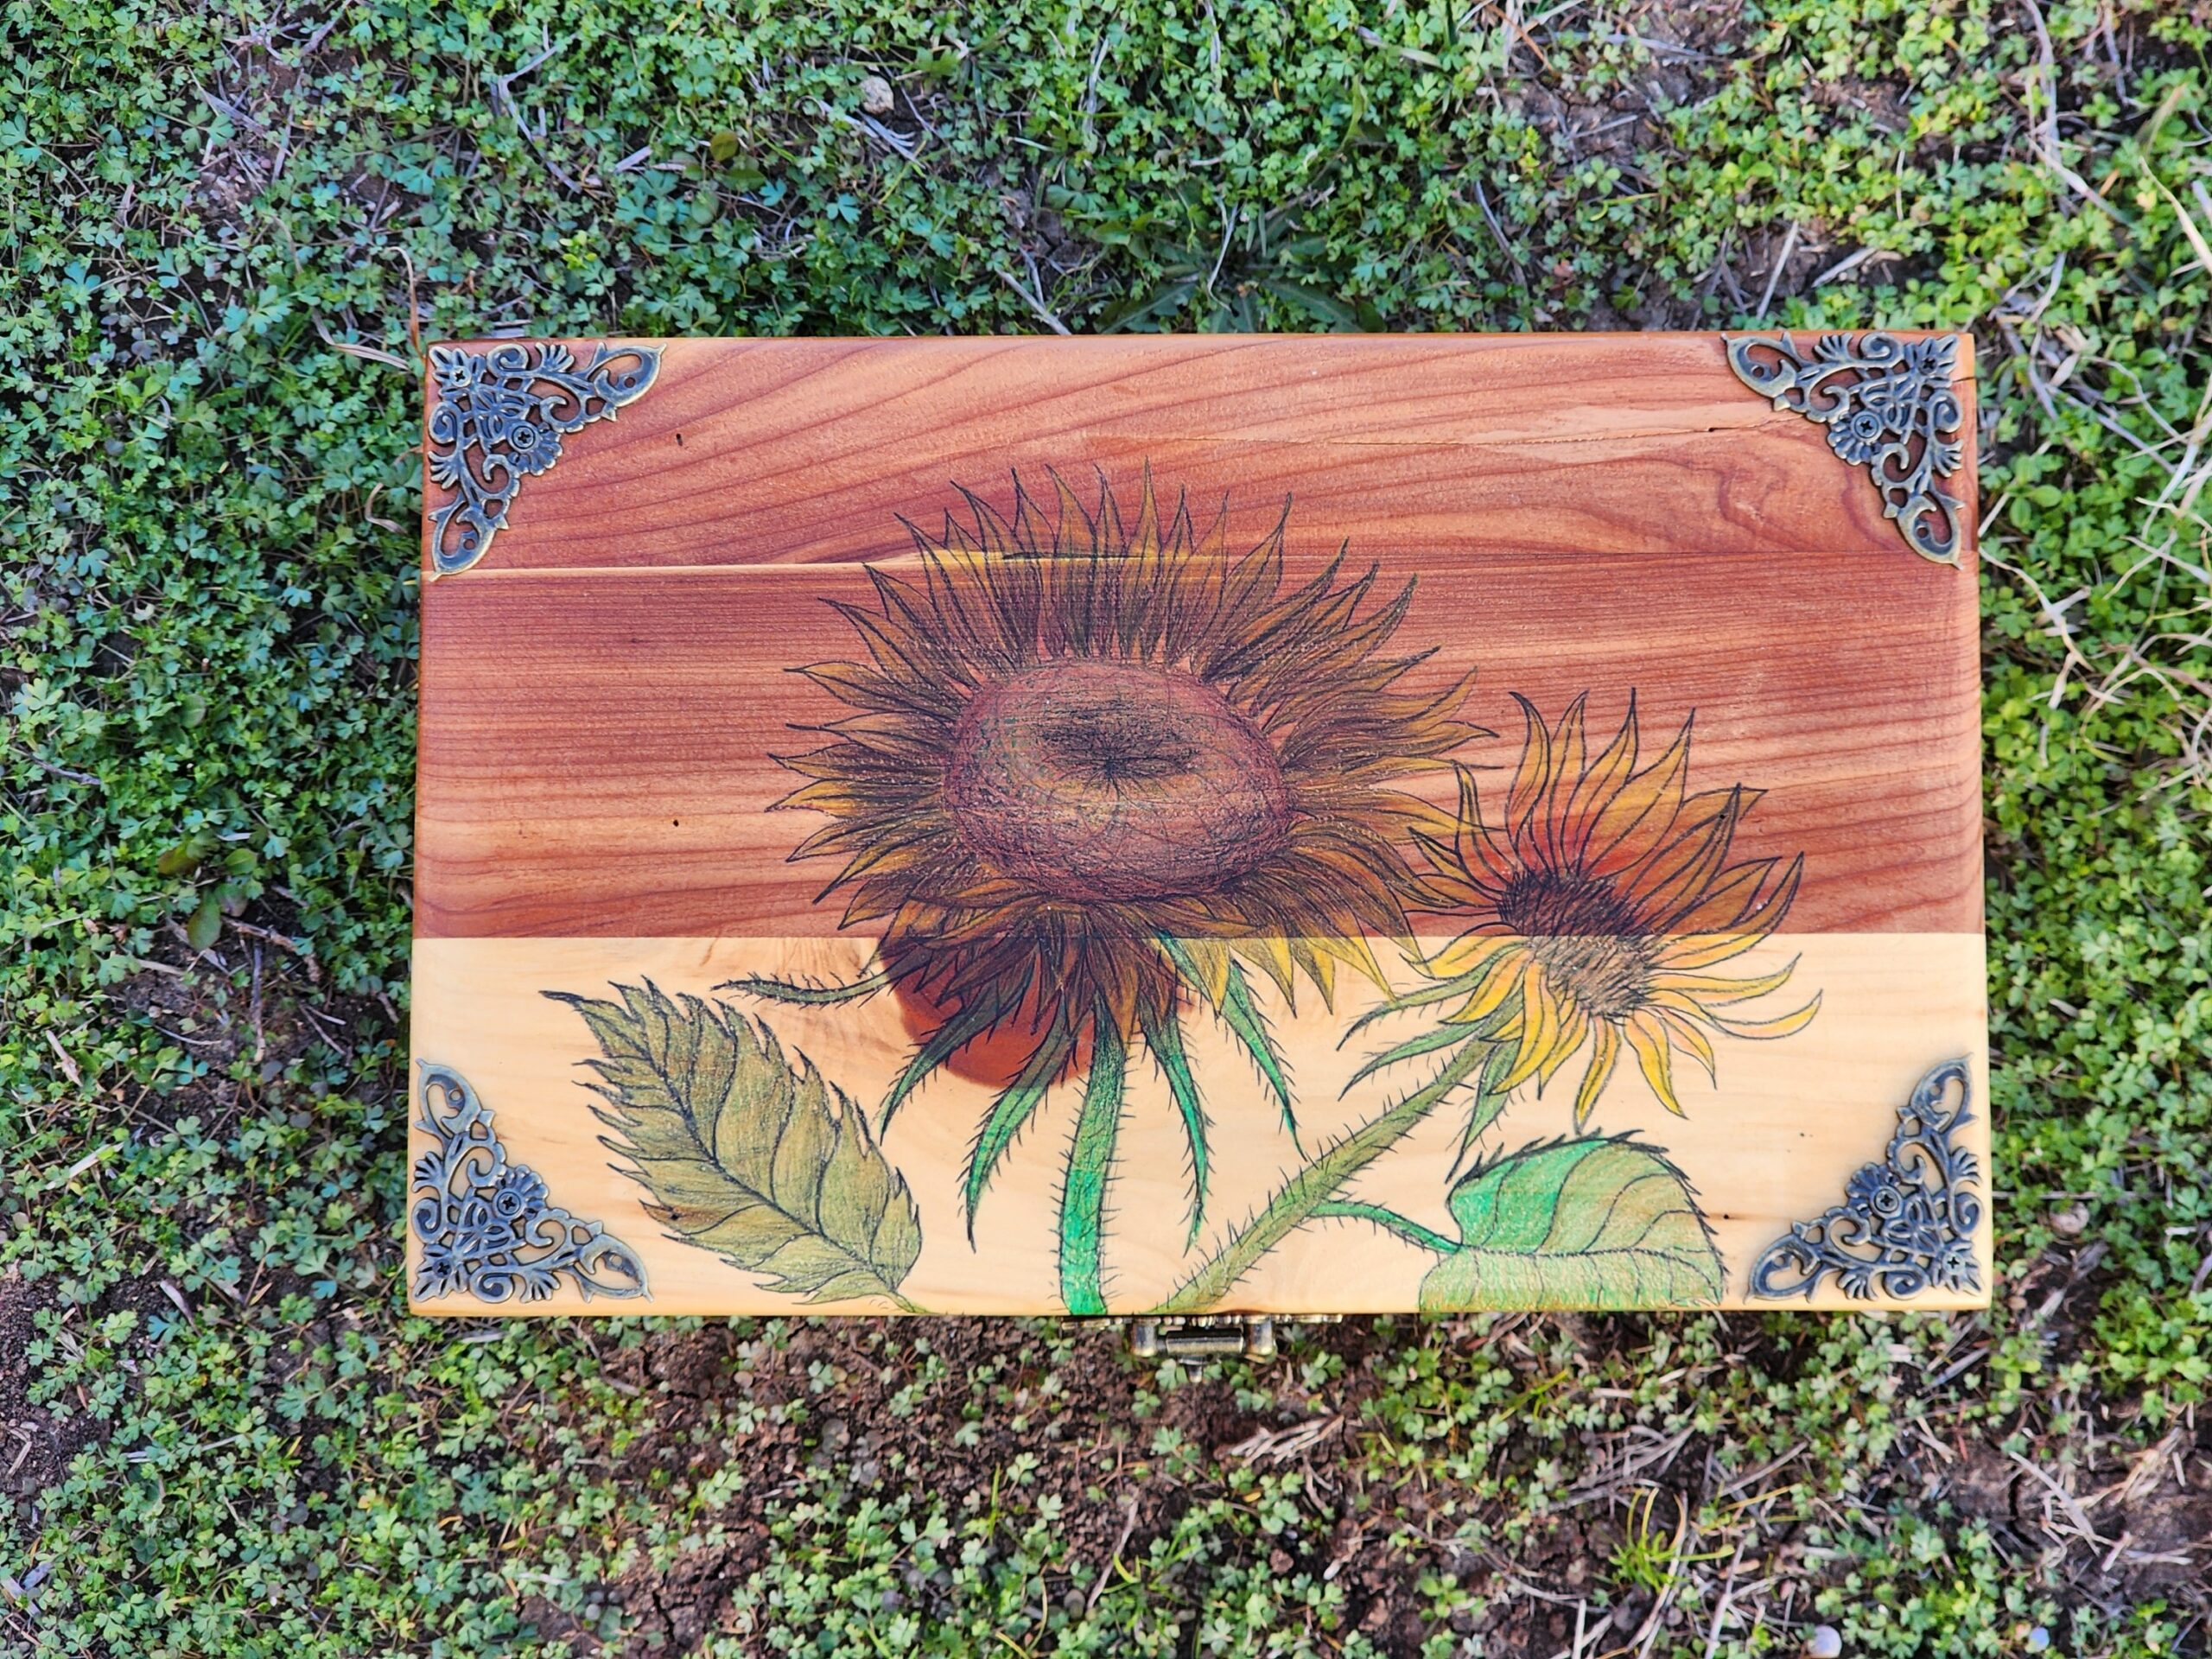 Repurposed antique wooden jewelry box. Handpainted design of a sunflower drawn with graphite and color pencils. Brass feet and antique bronze plated clasps.